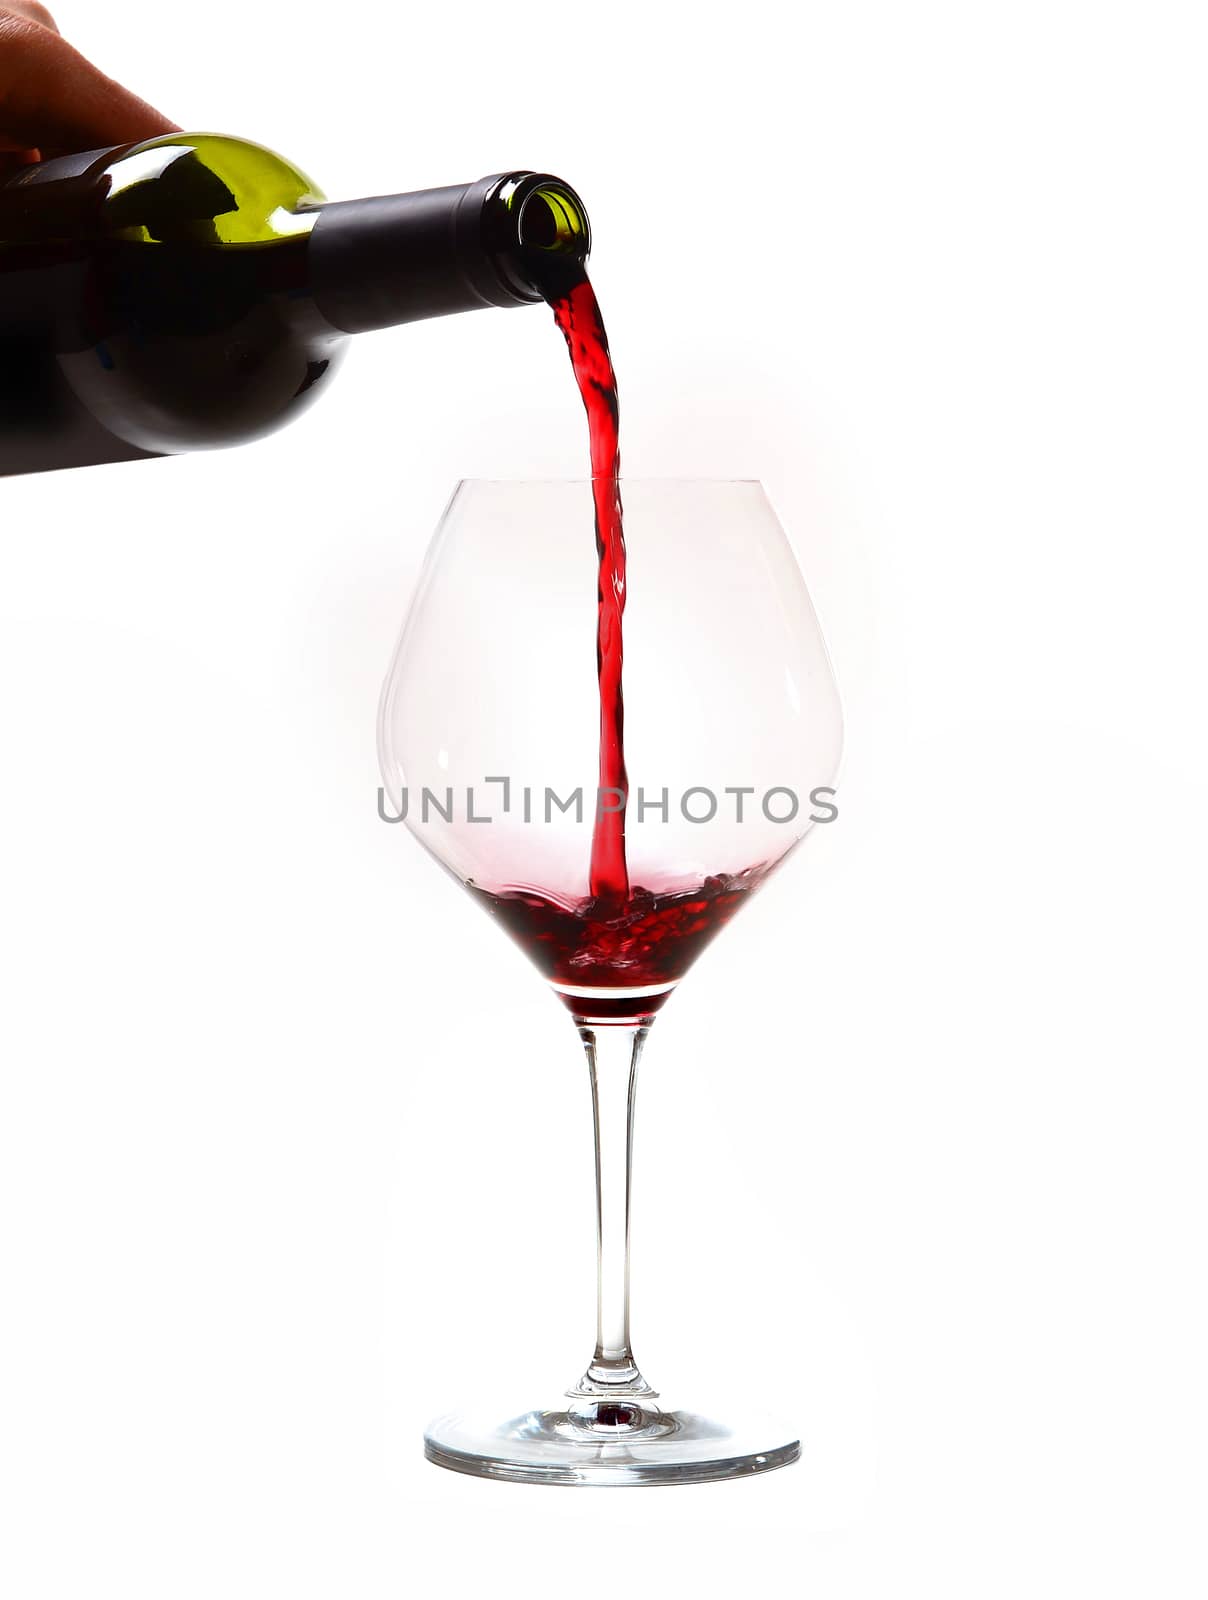 Man Hand holding Bottle filling Glass with Red Wine by ocusfocus